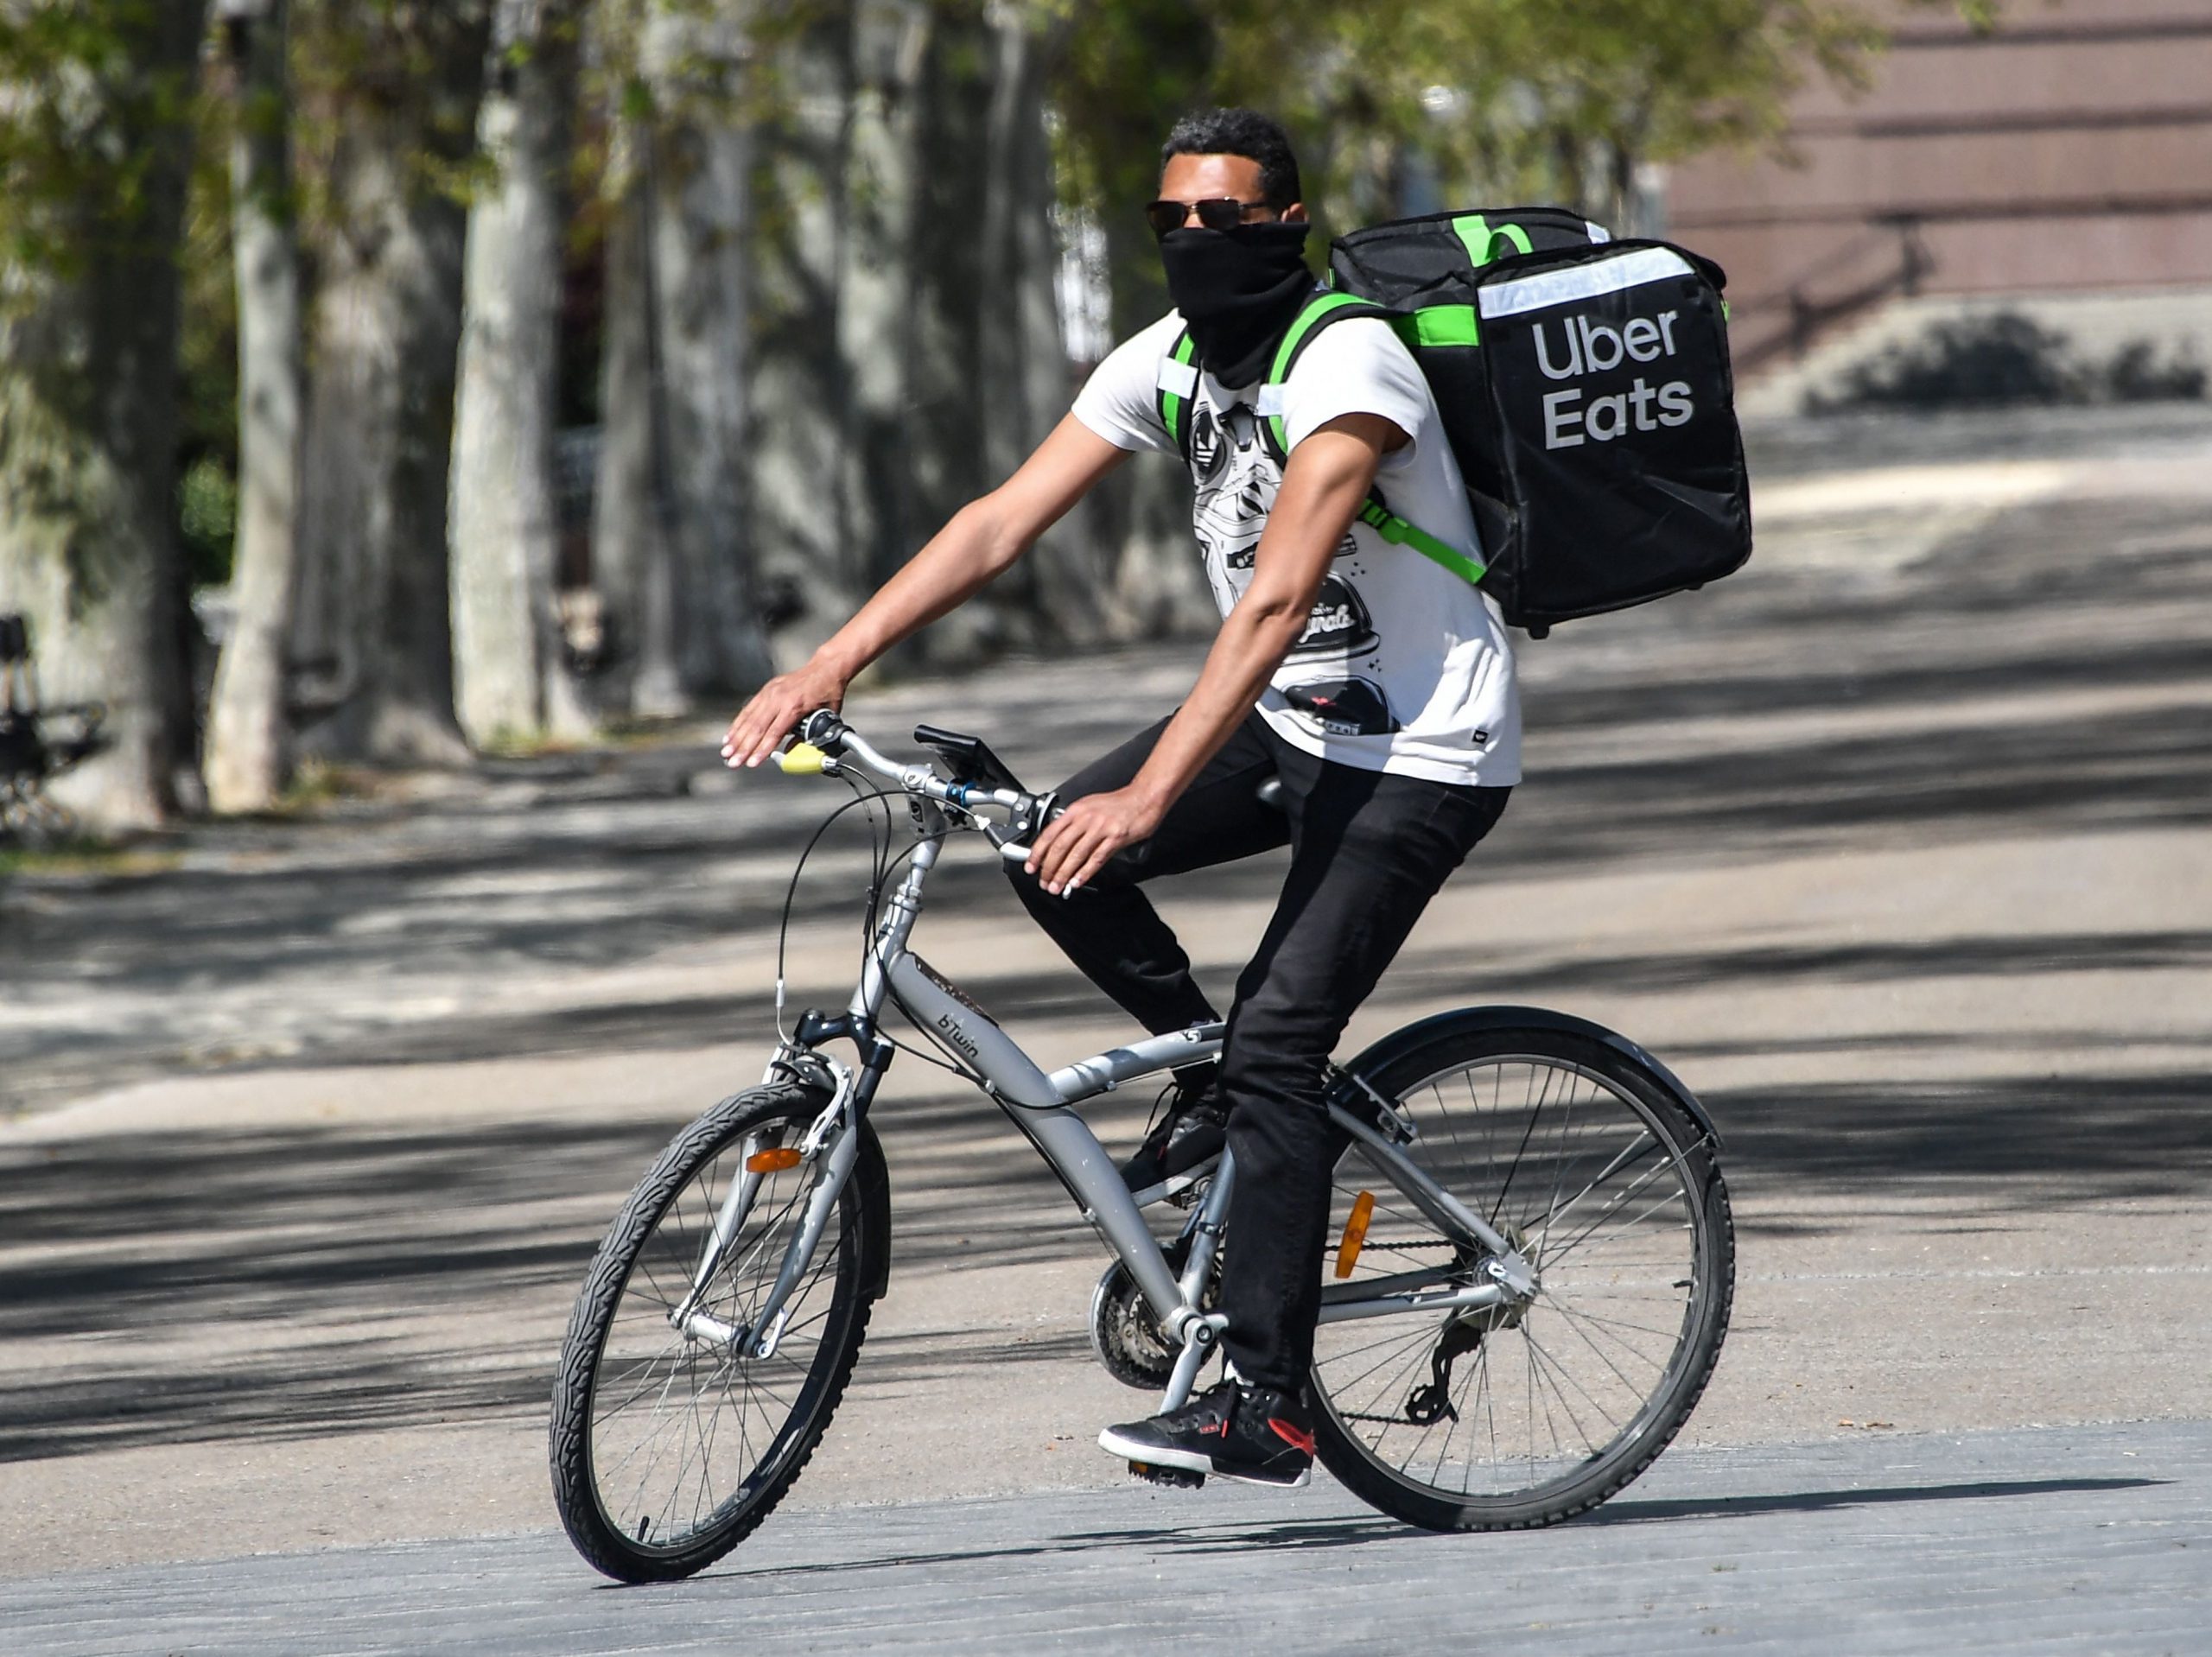 Uber is restructuring its business to focus on rides and food delivery, which has been a bright spot for the company during the pandemic.